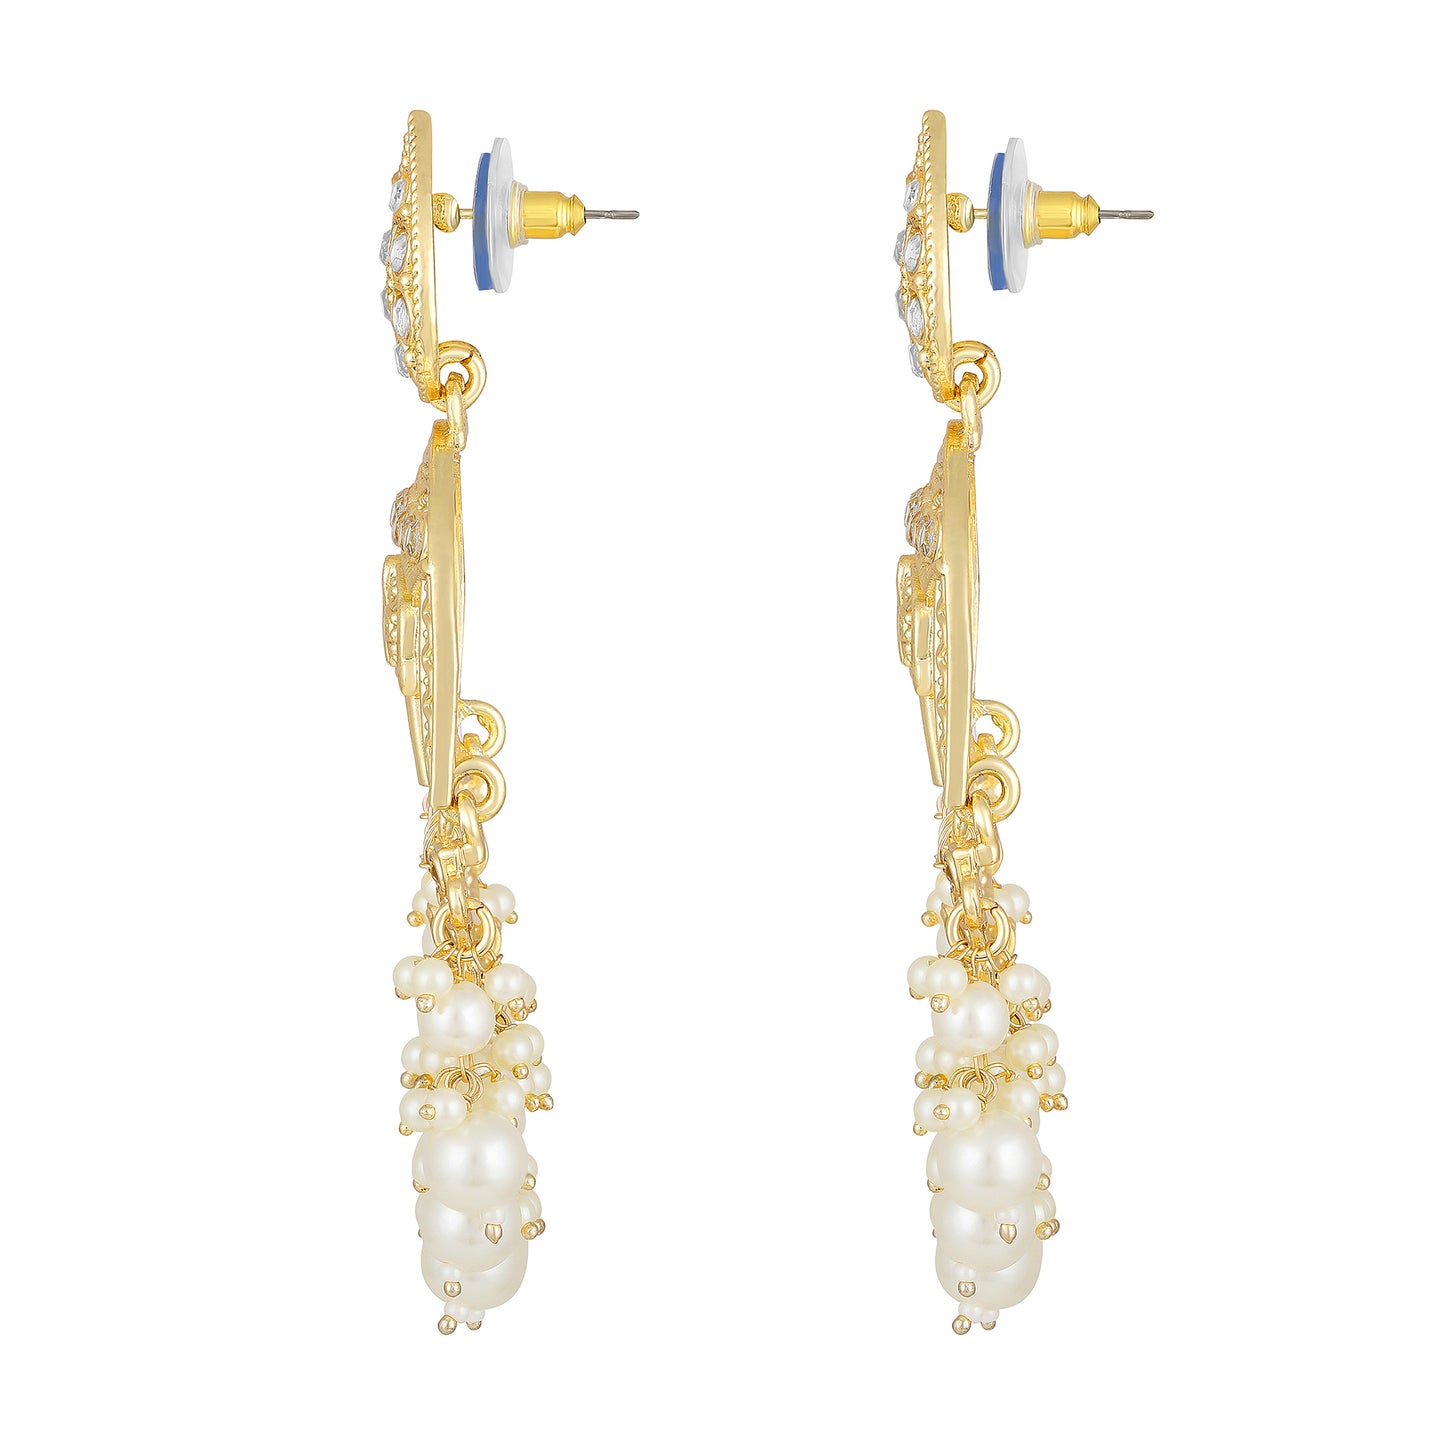 Bdiva 18K Gold Plated Traditional Elephant Earrings with Semi Cultured Pearls.